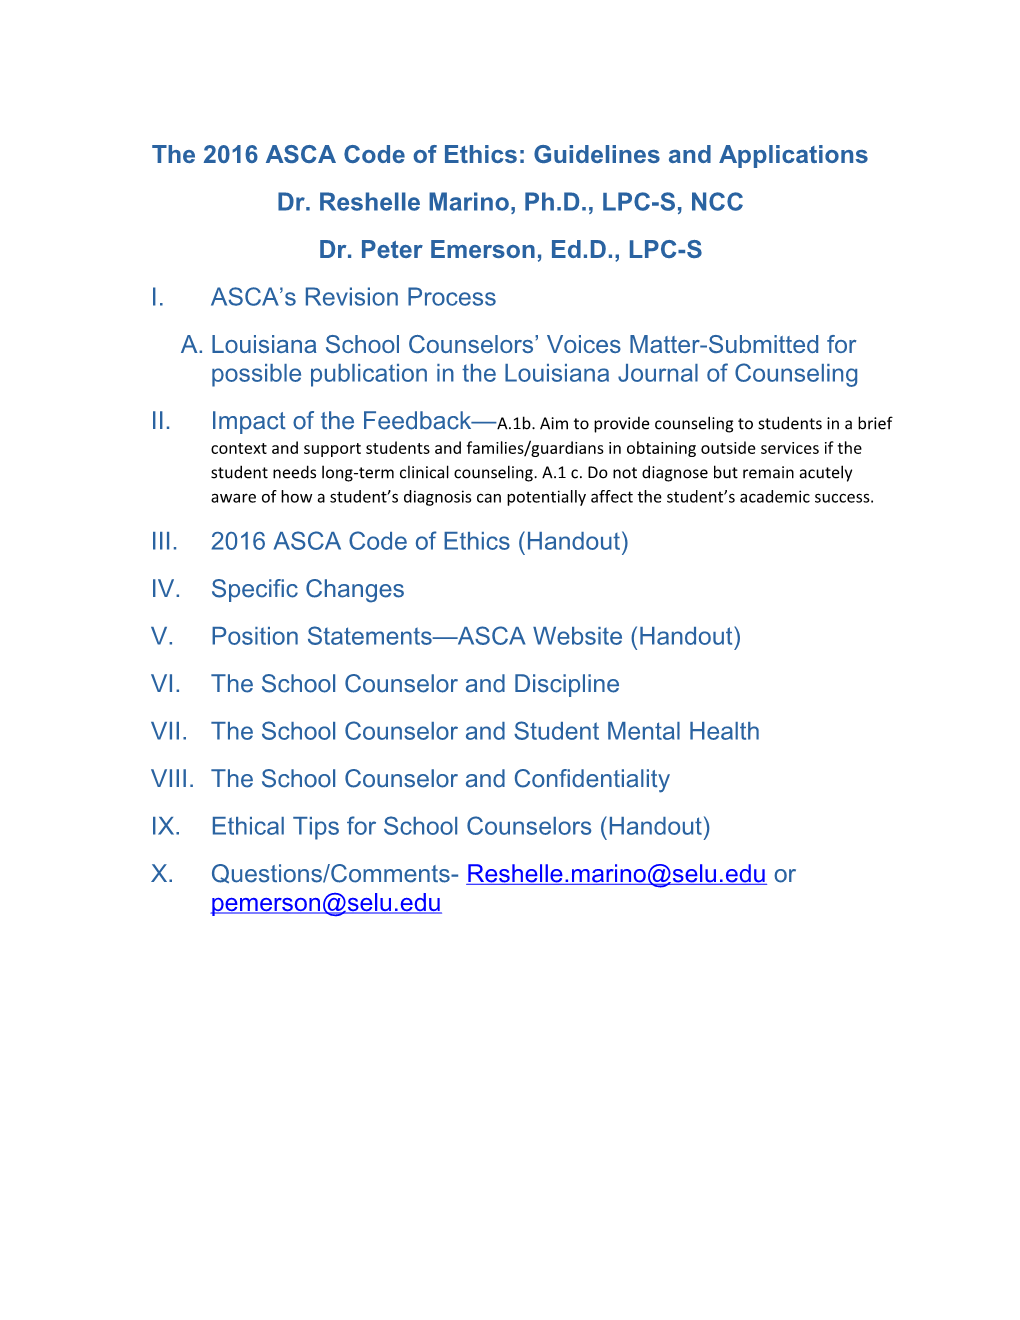 The 2016 ASCA Code of Ethics: Guidelines and Applications